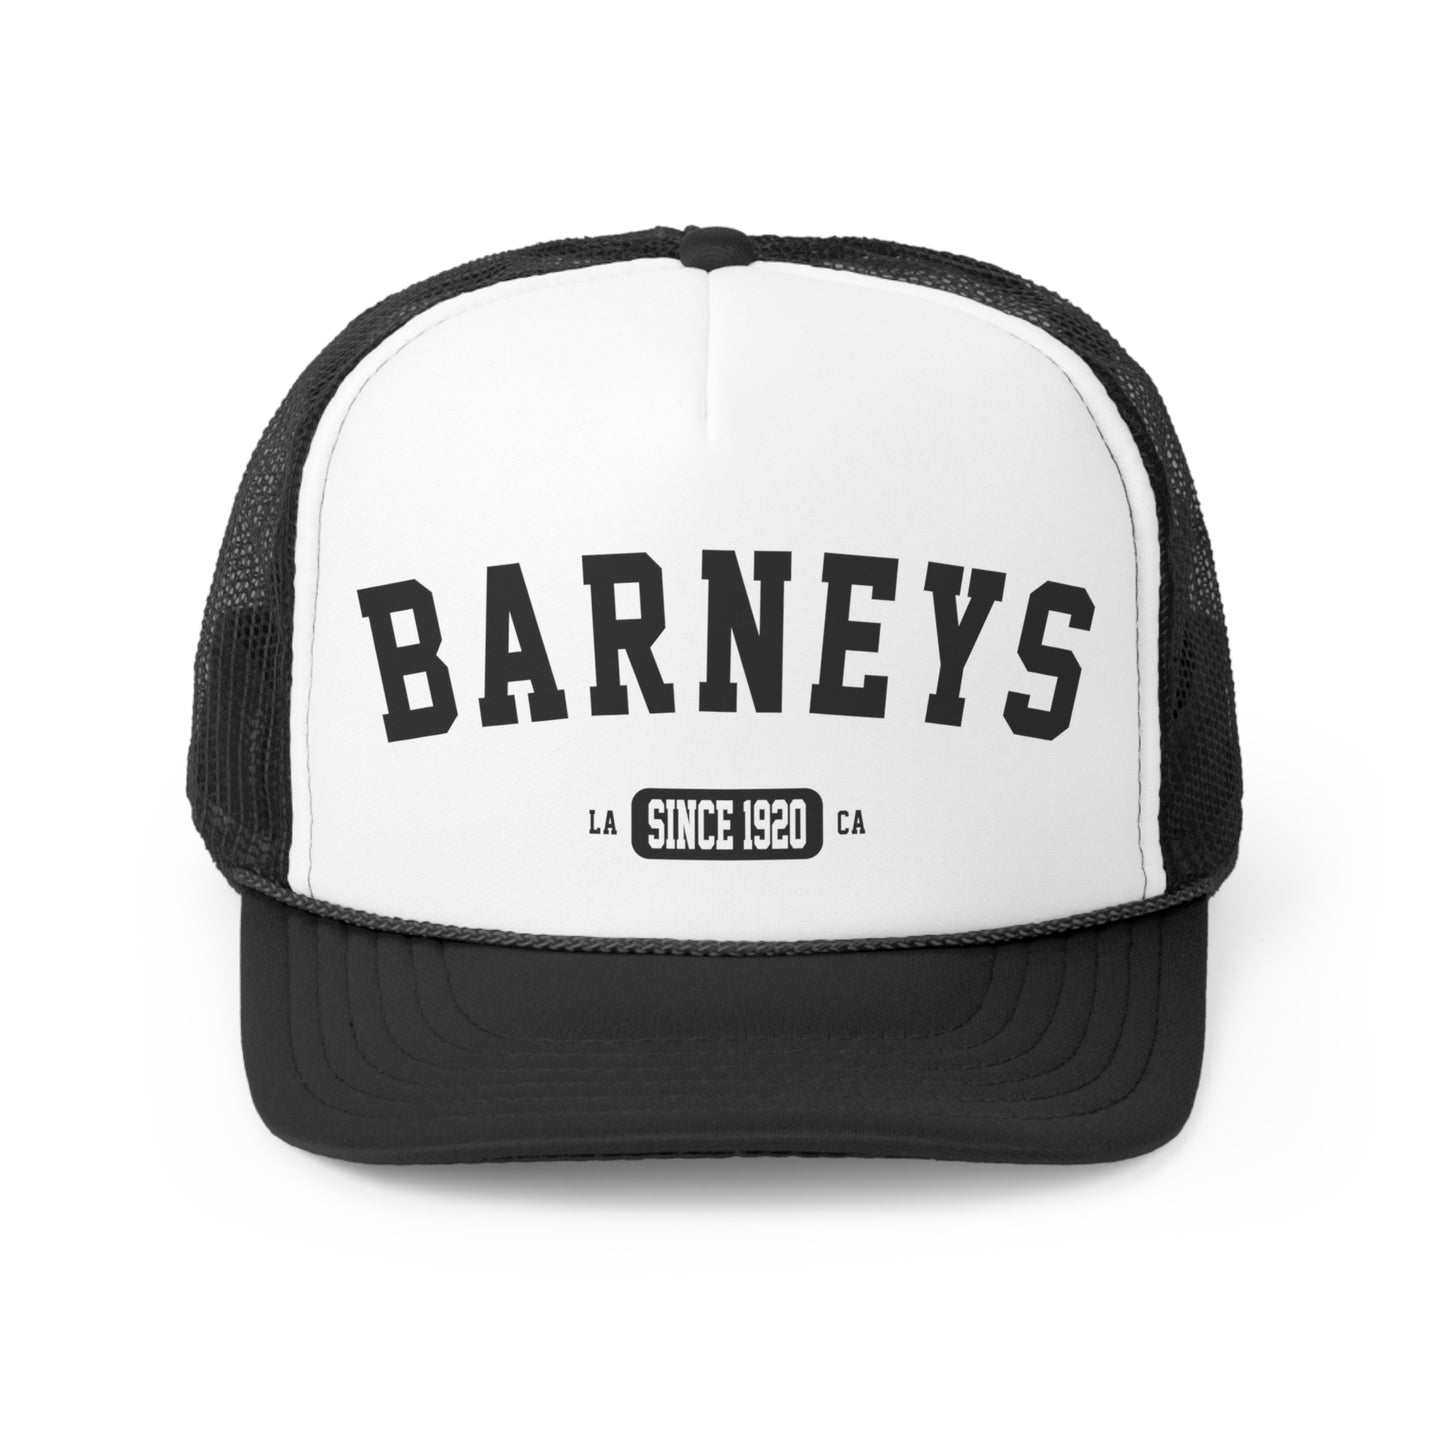 Vintage Collegiate | BARNEY'S BEANERY - Trucker Hat | Black Graphic On Black And White Trucker Hat, Front View